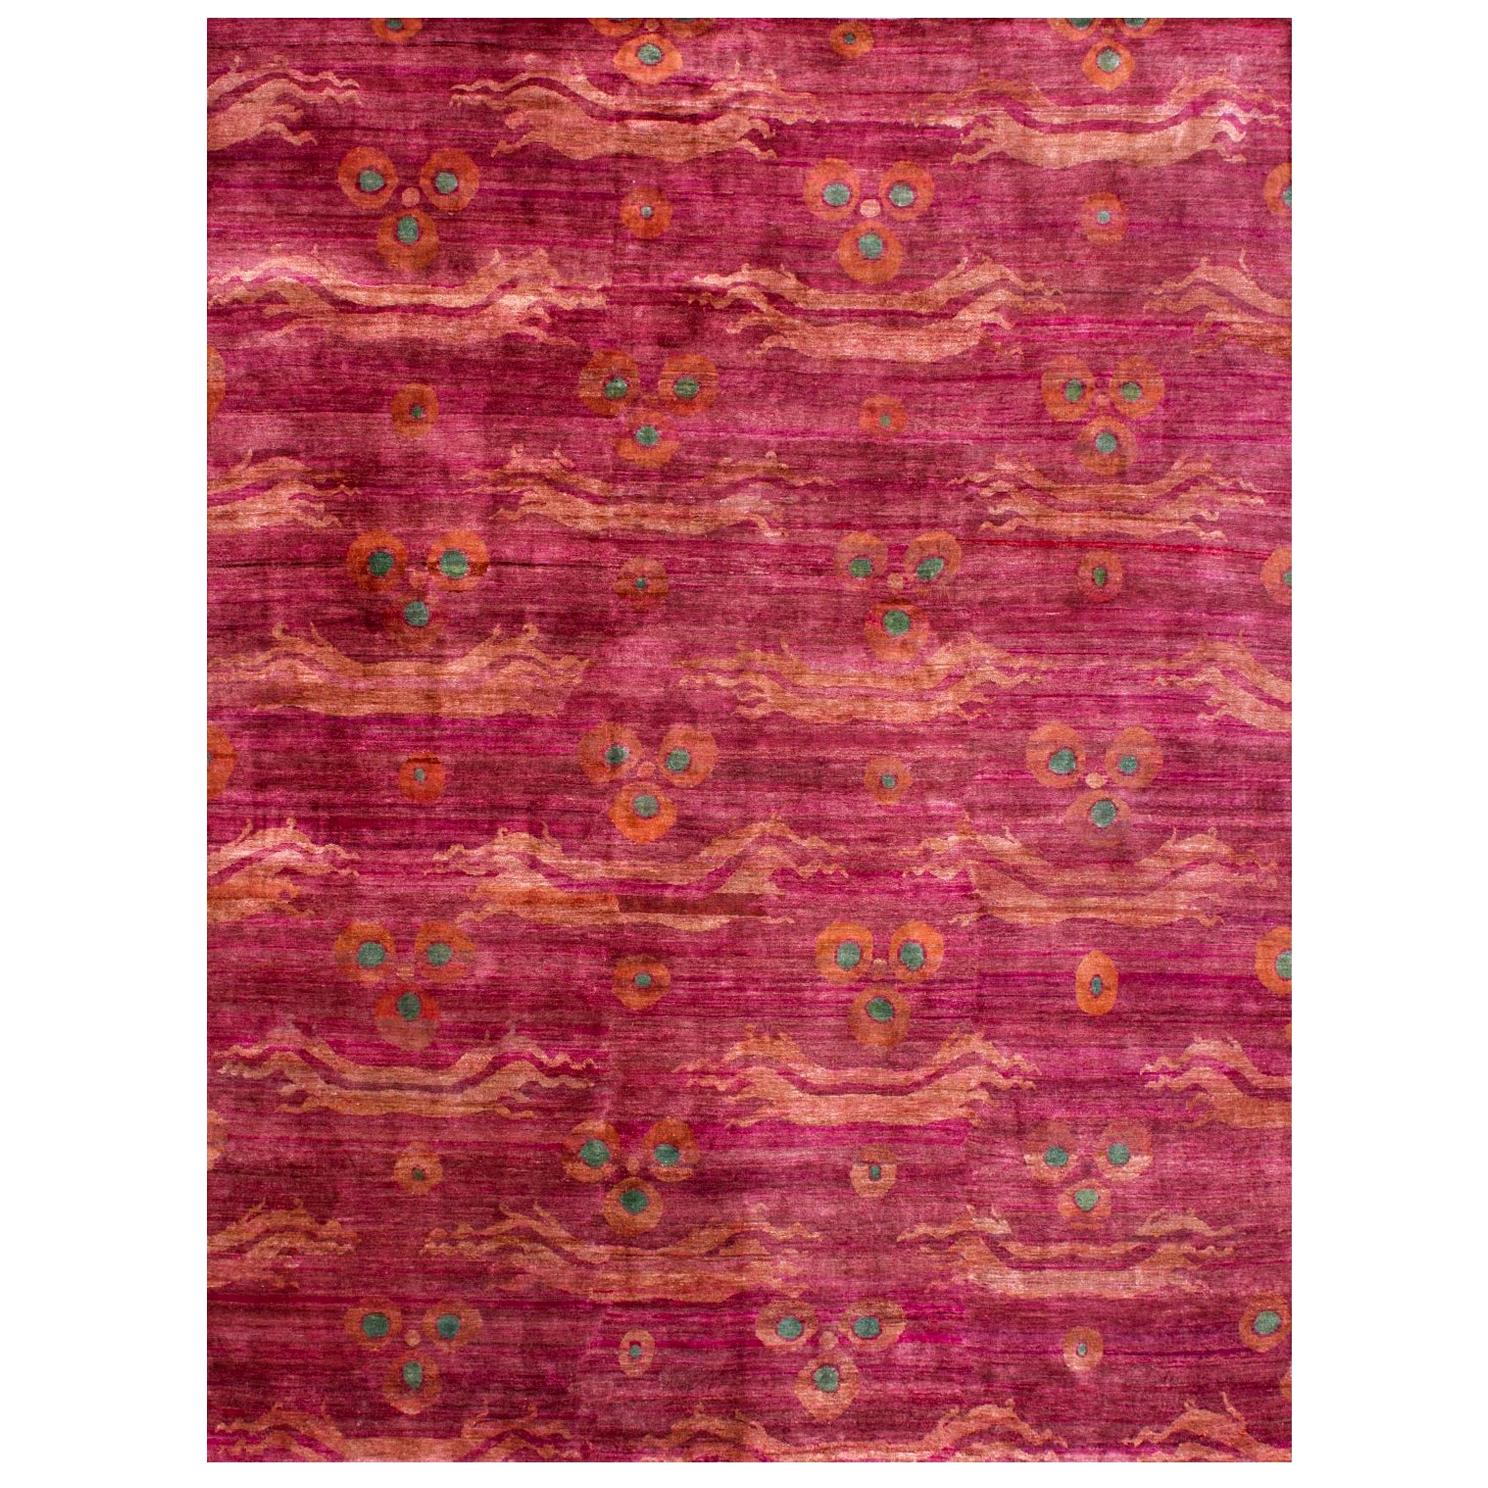 Pink Fuchsia Teal Chinese Design Hand Knotted Soft Natural Silk Ikat Rug